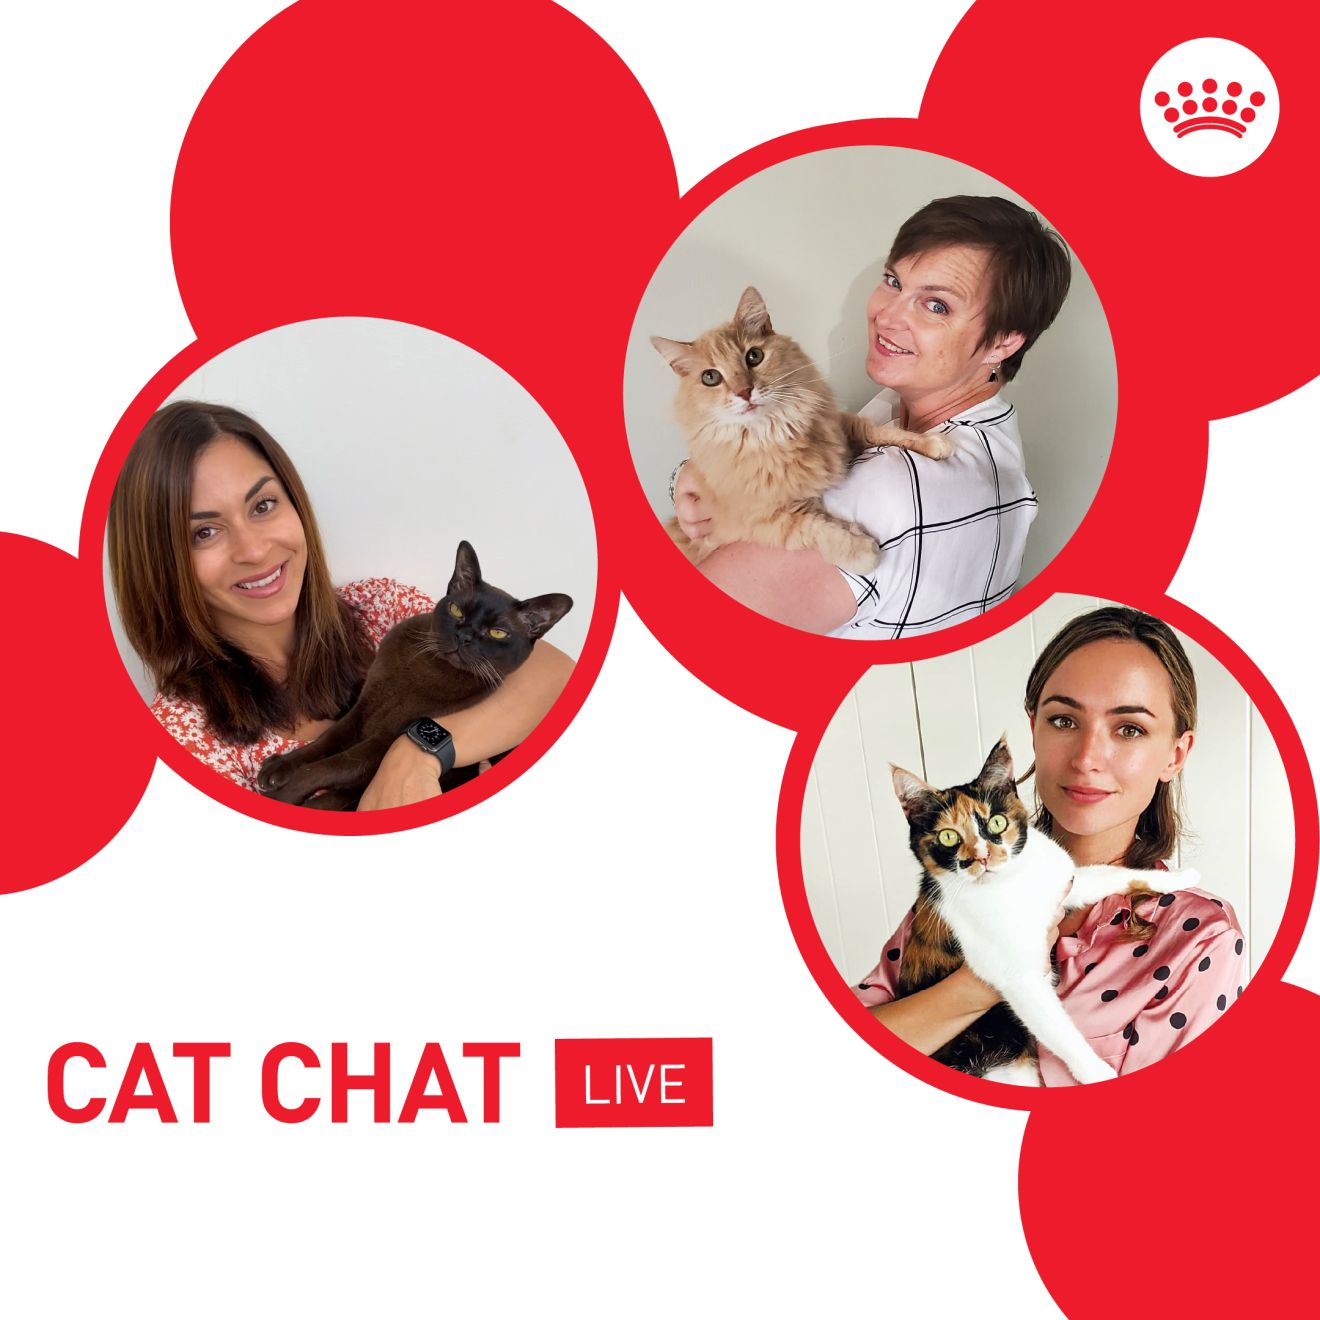 cat chat live facebook event image with hosts